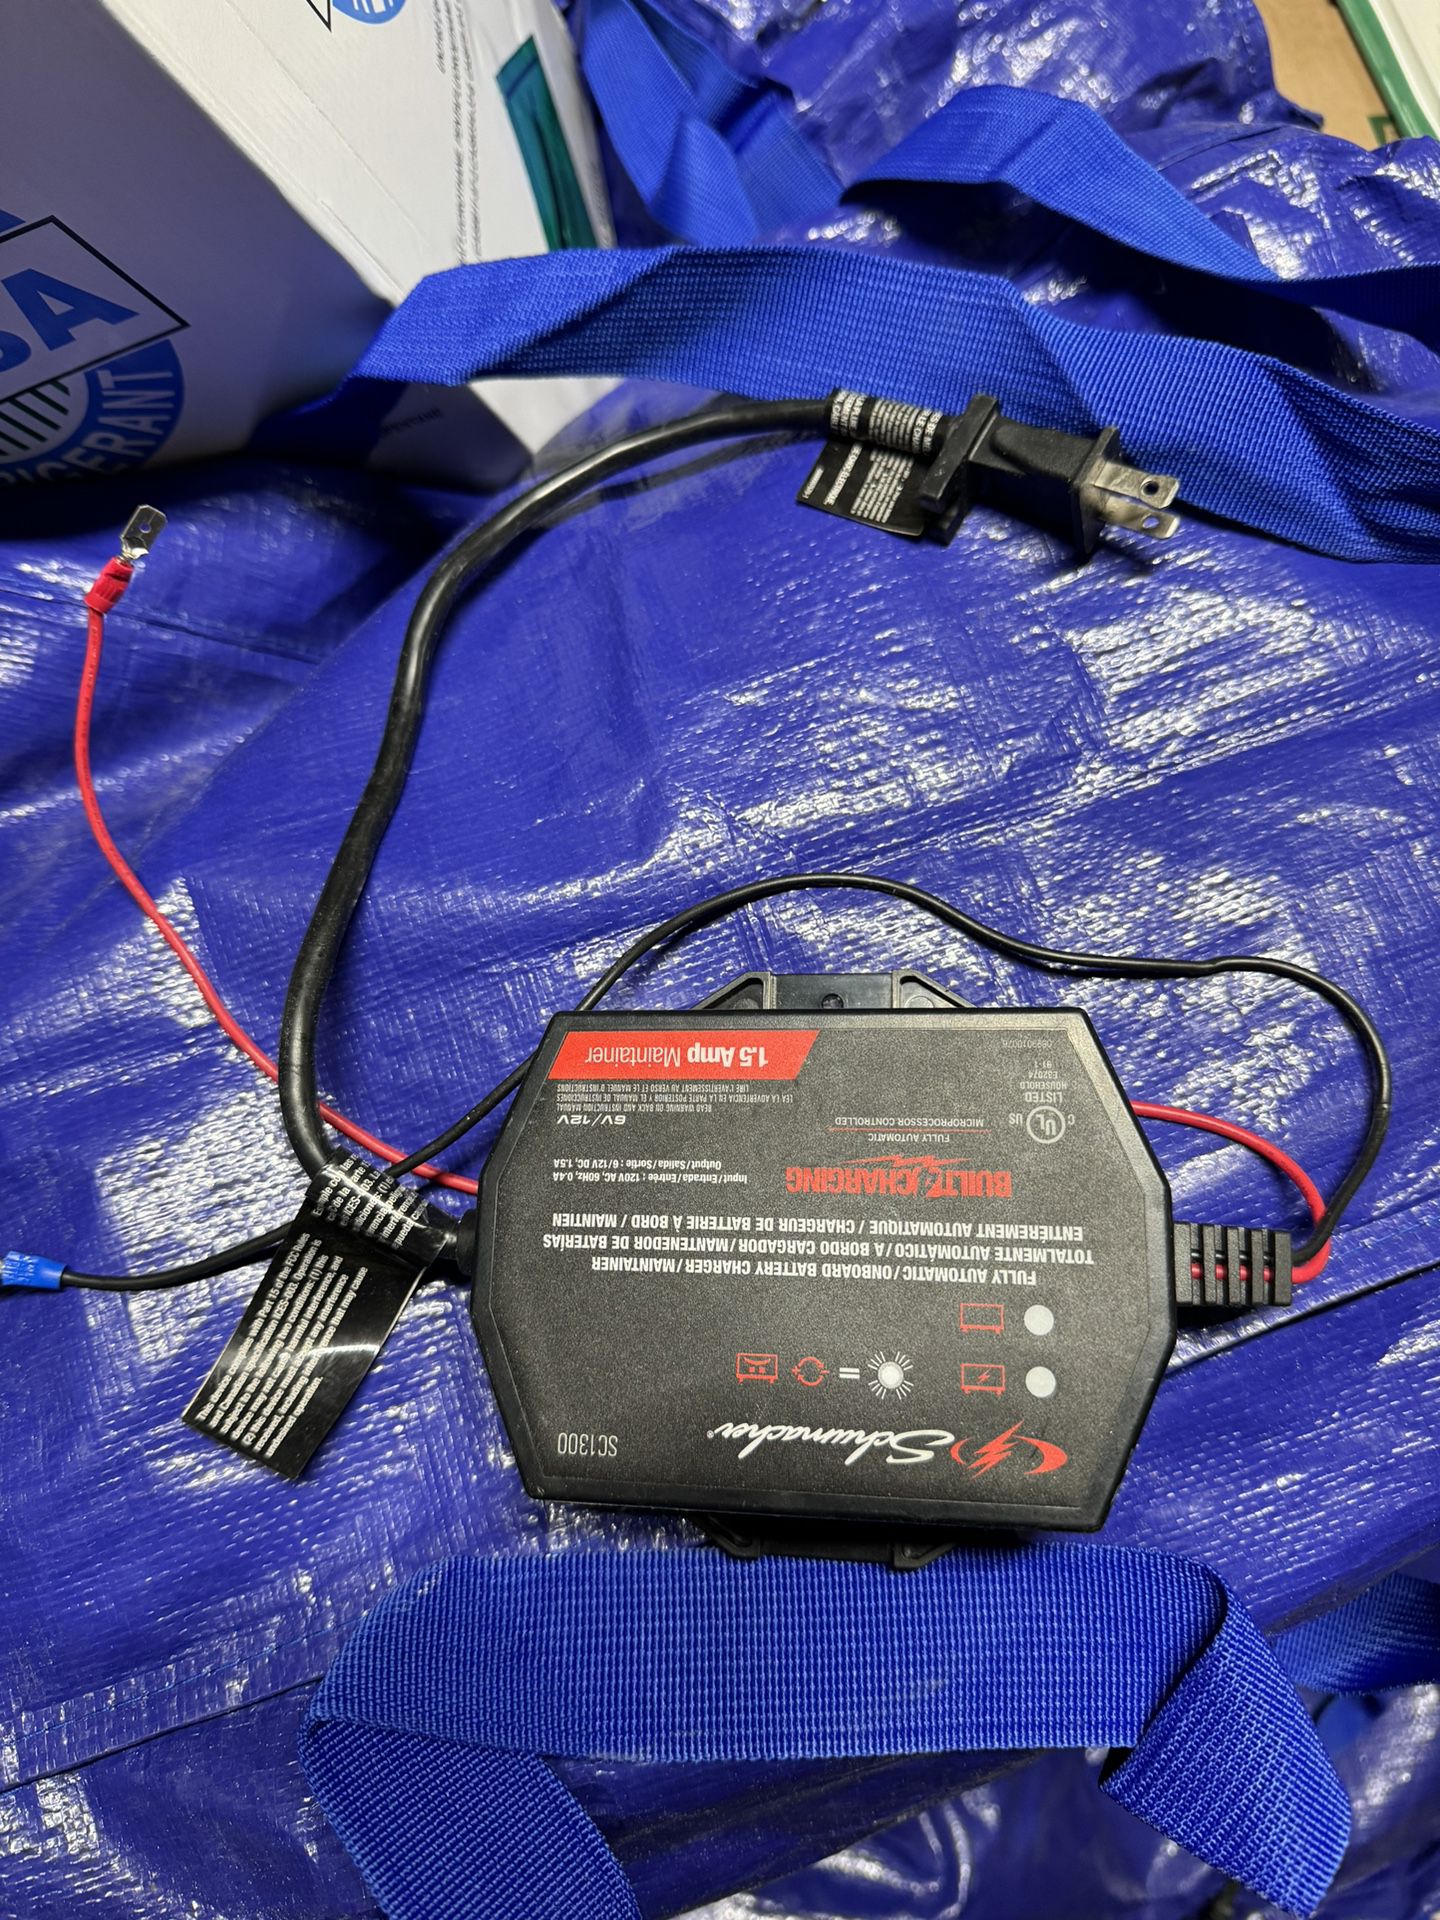 12v Car And Motorcycle Battery Charger 